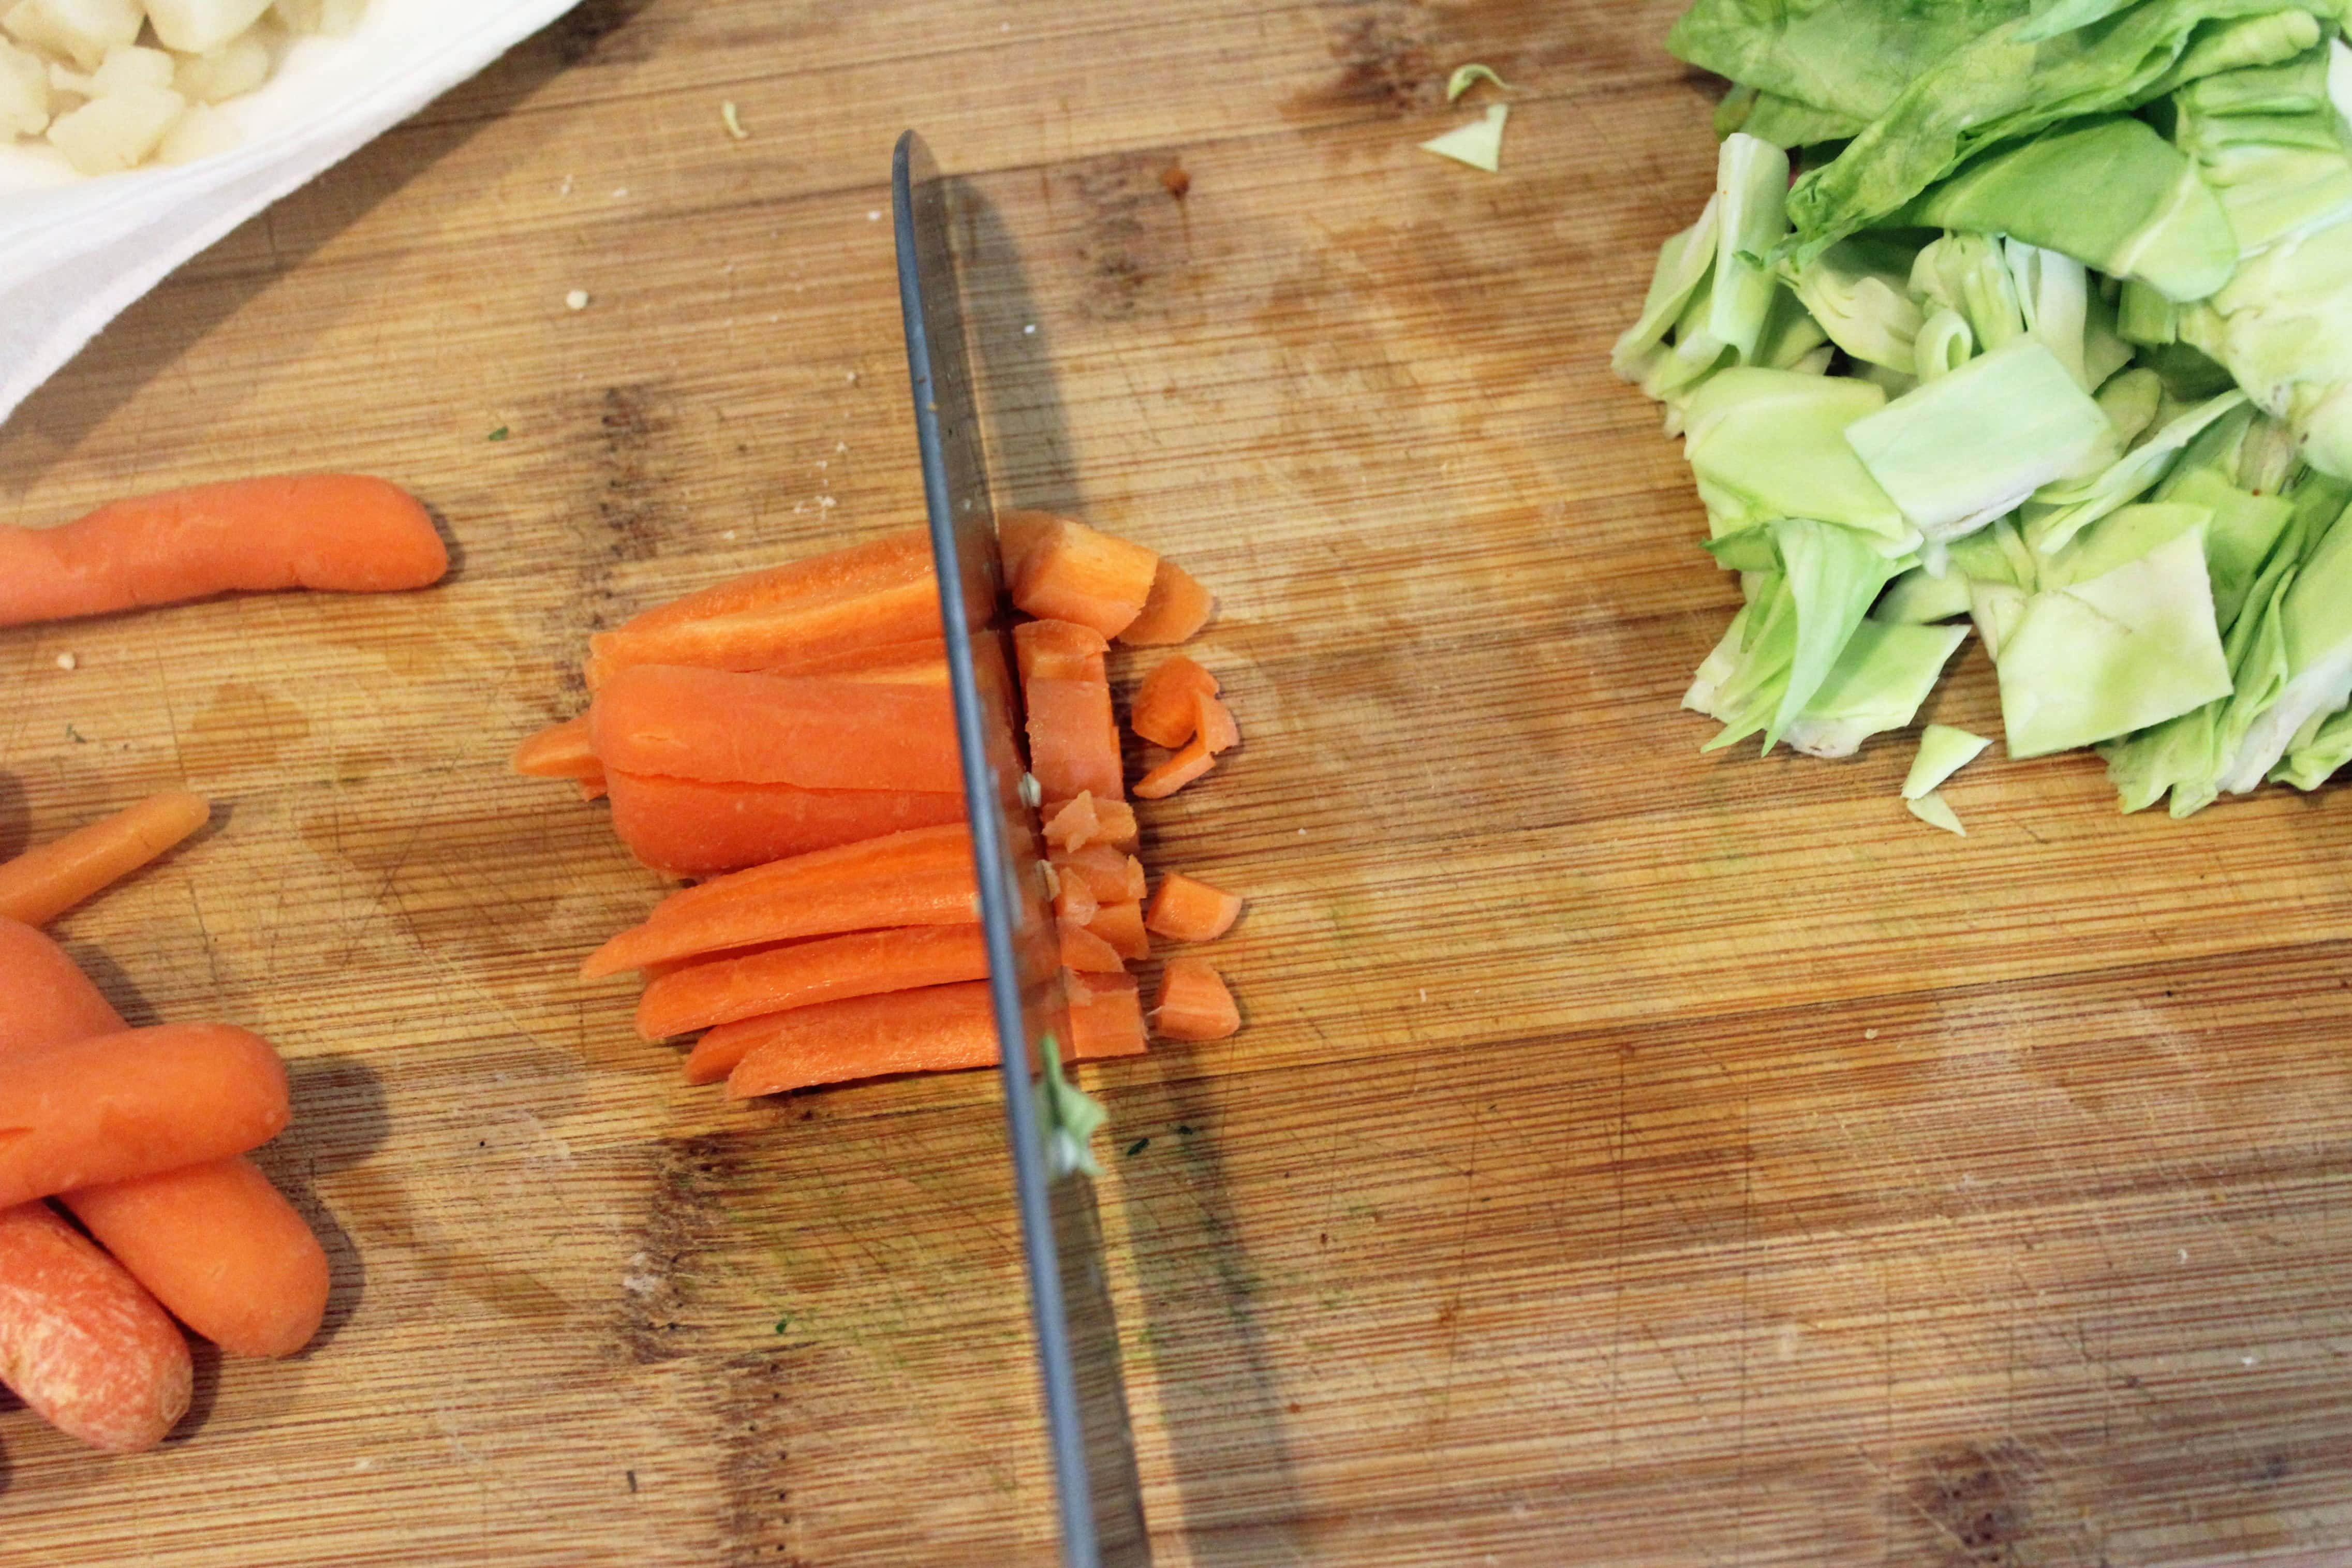 Finely chop carrot